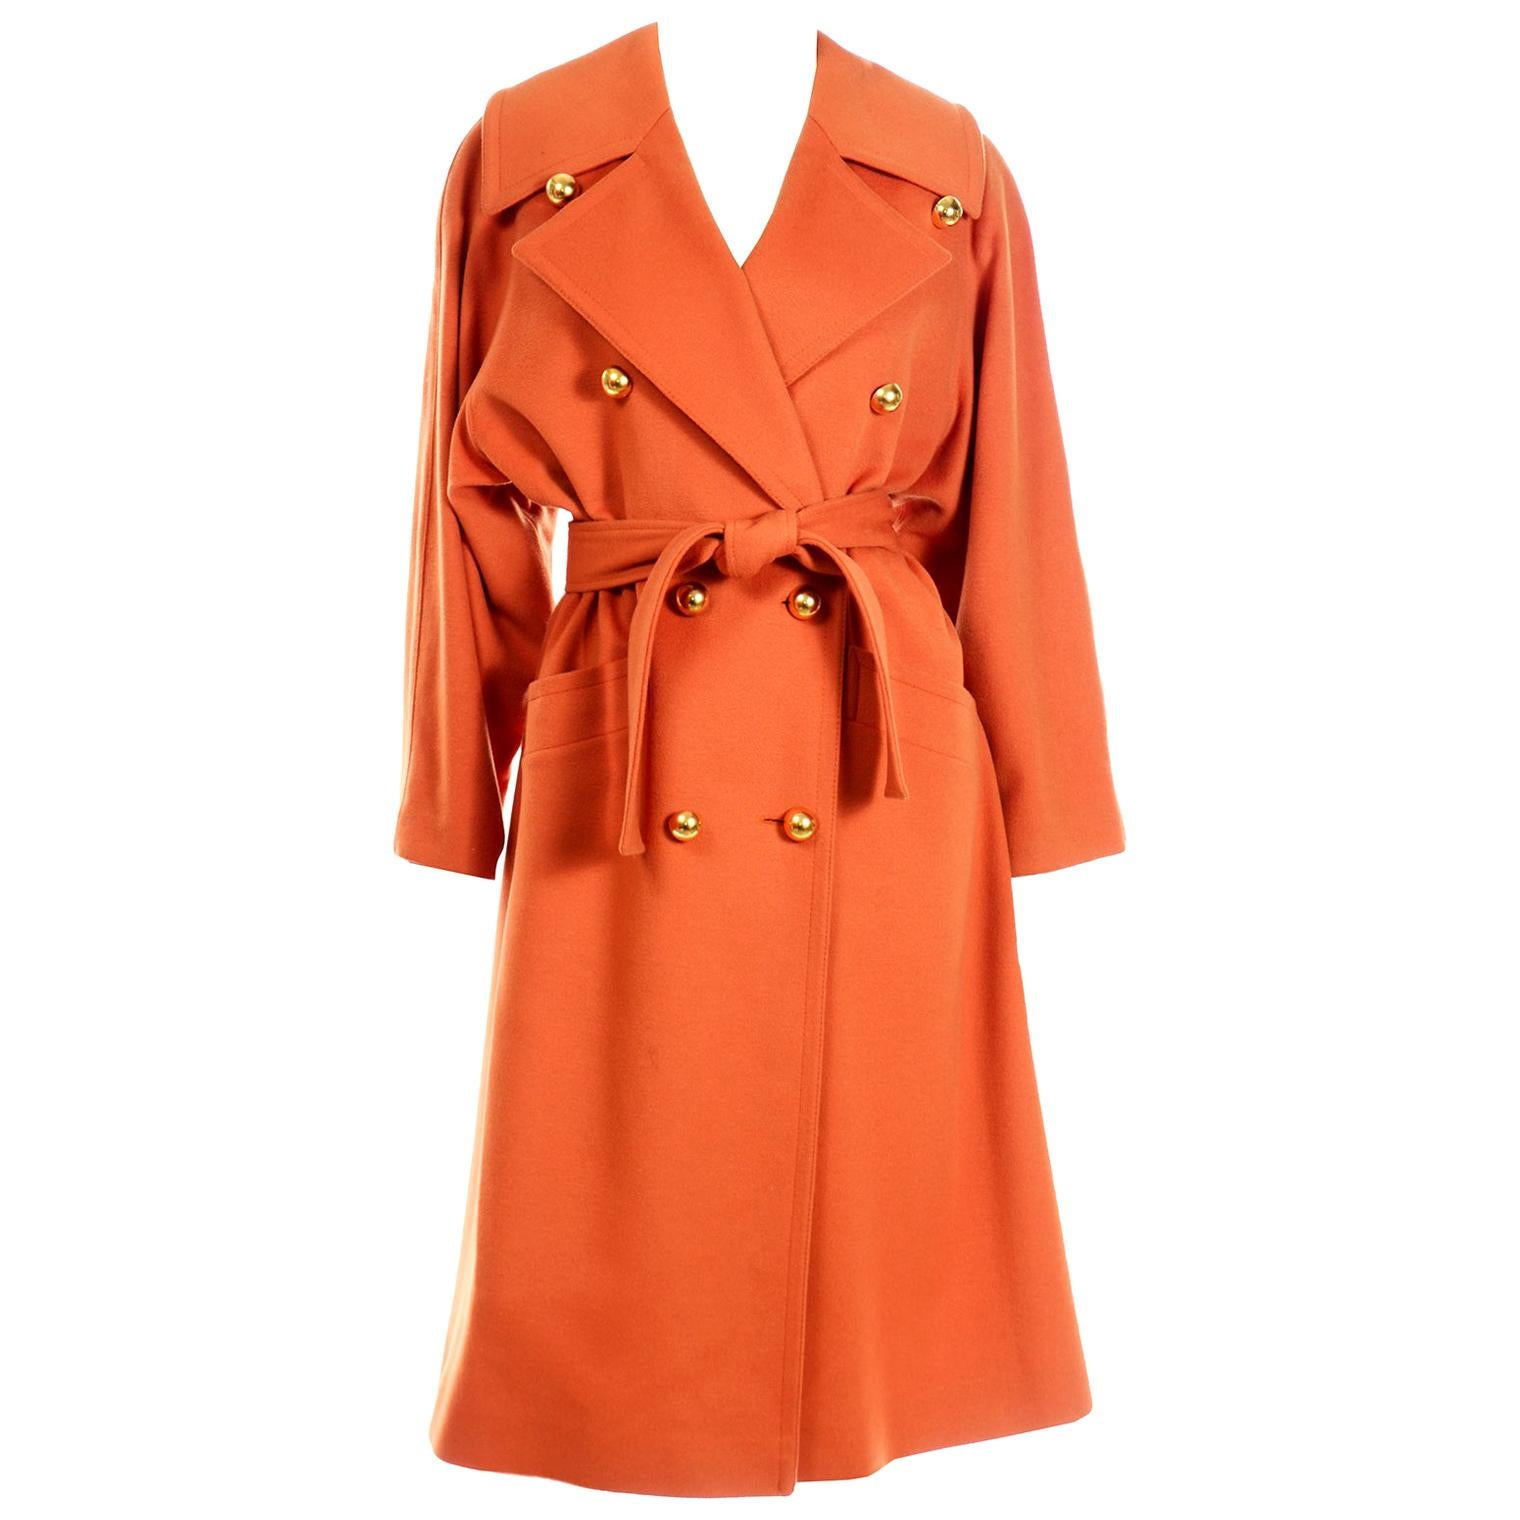 Guy Laroche Vintage Orange Cashmere Blend Double Breasted Trench Coat With Belt For Sale